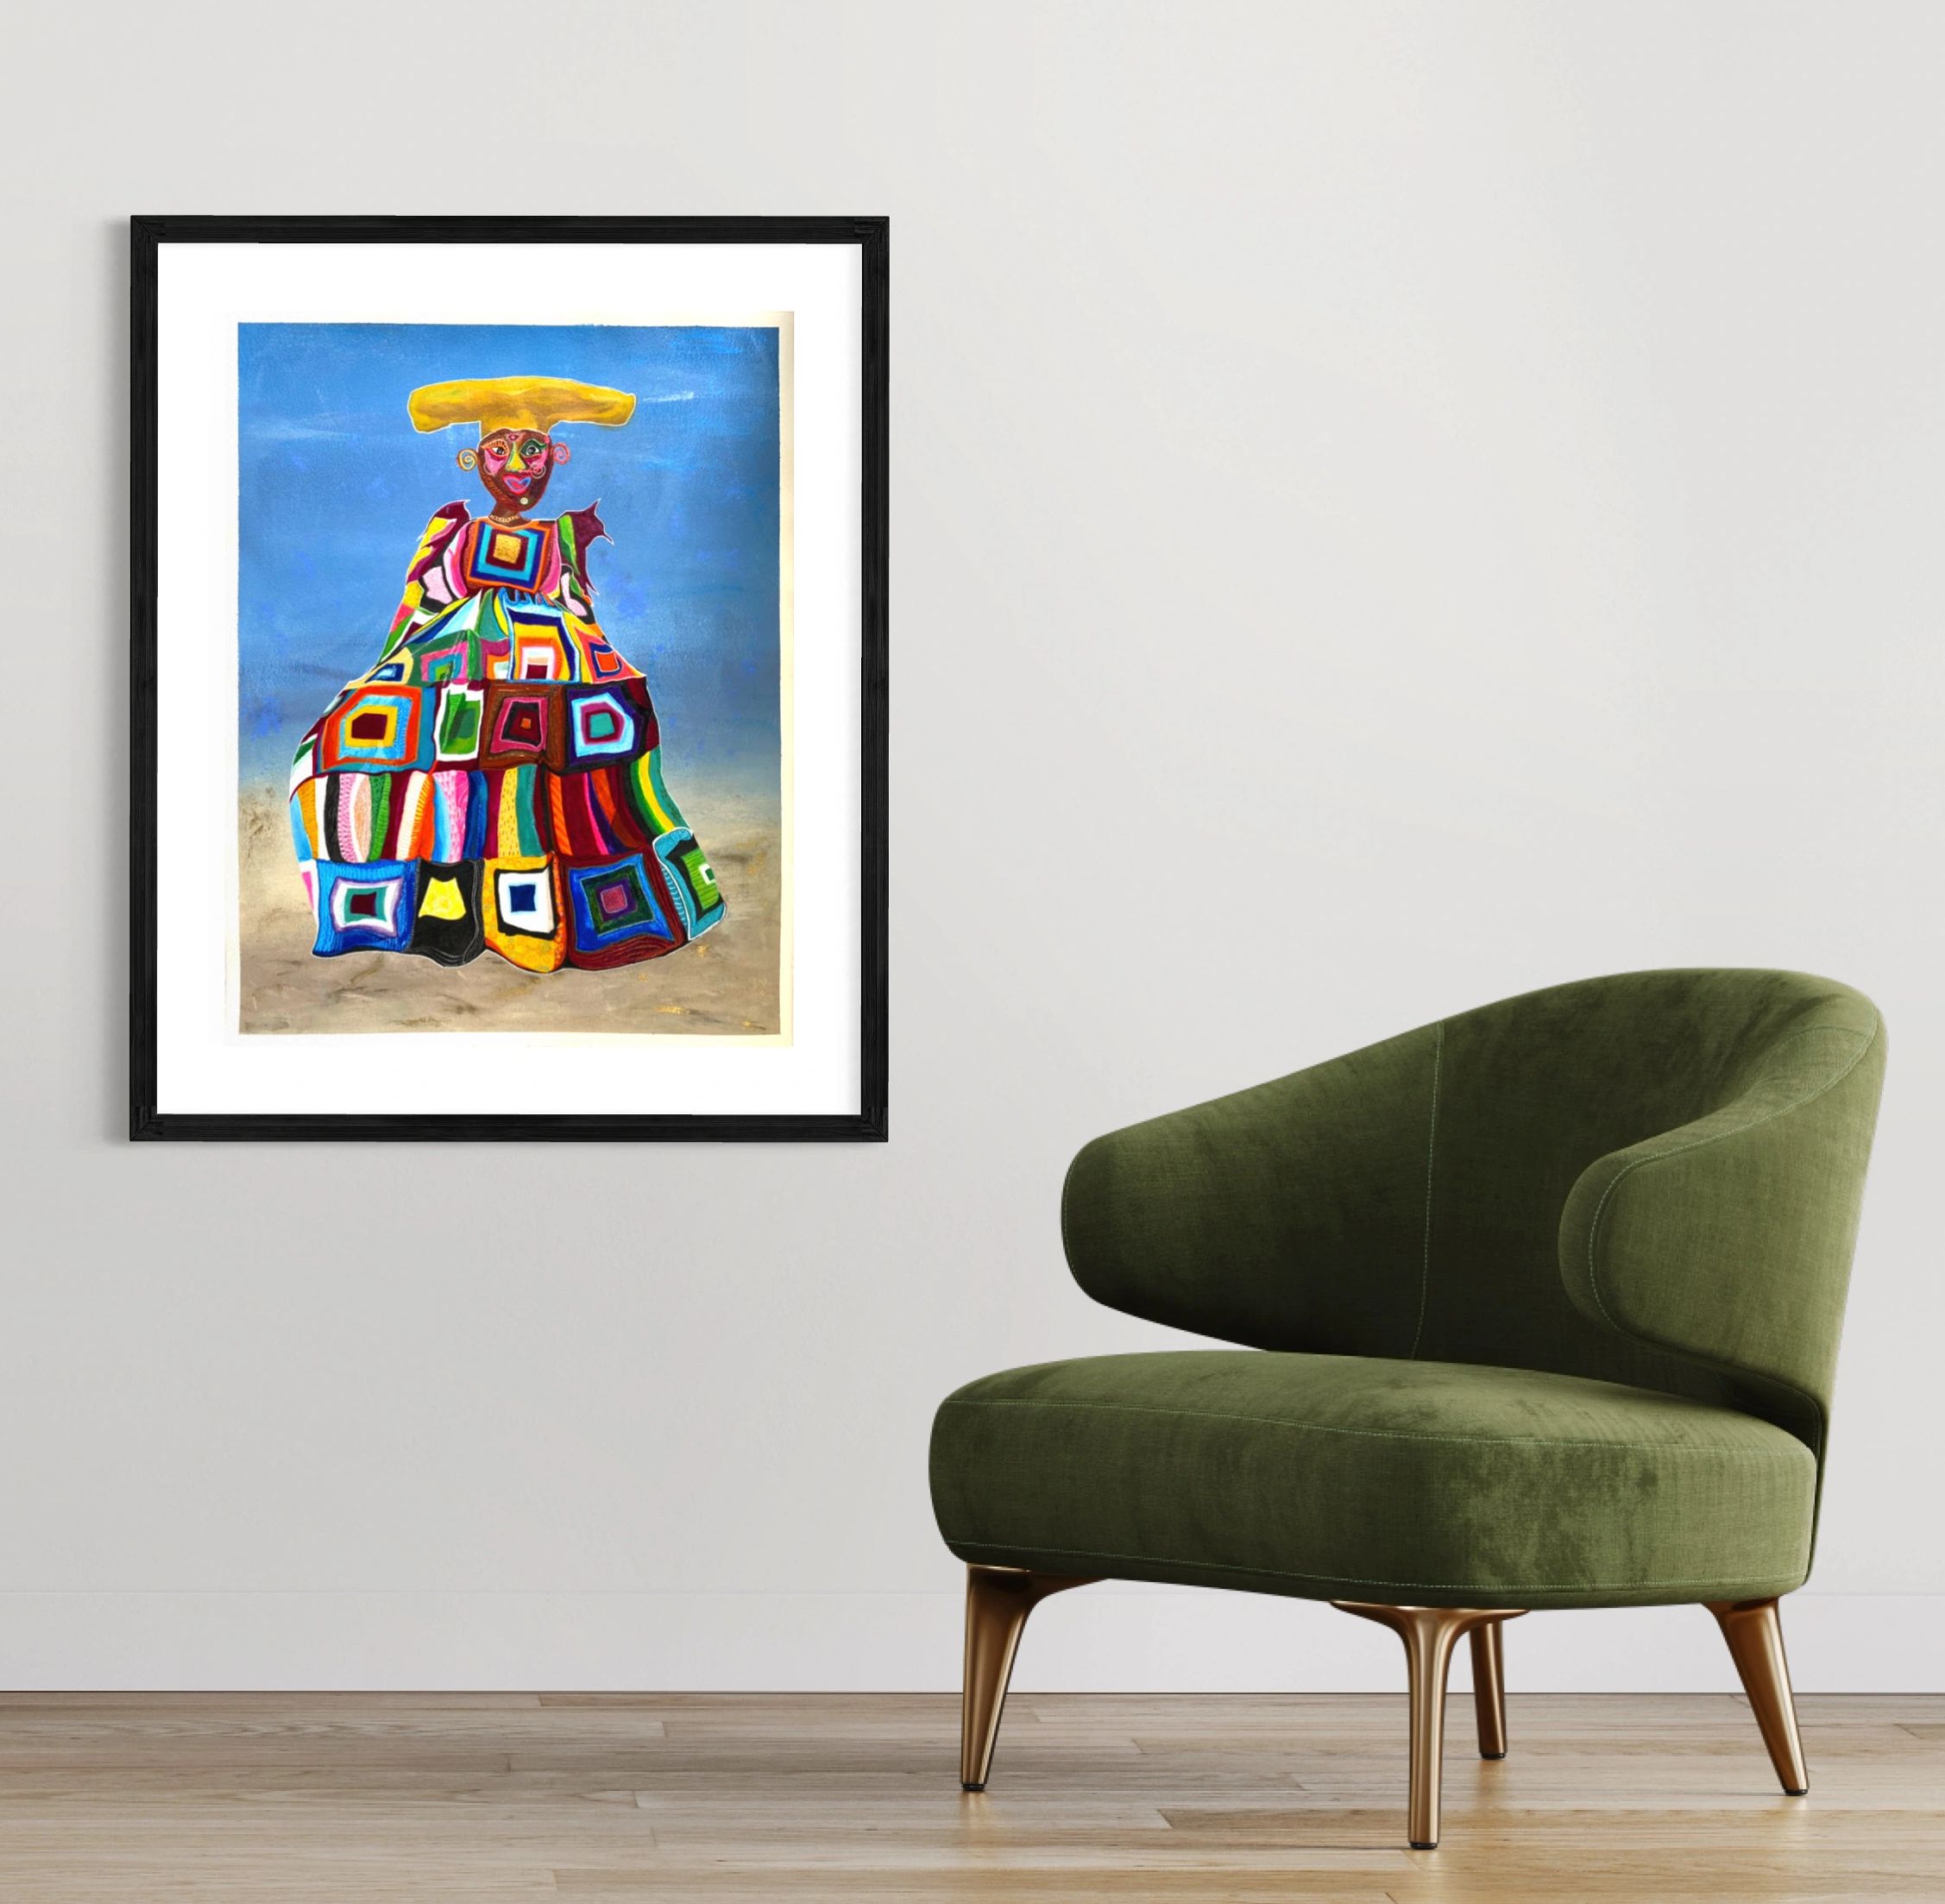 Colourful lady in a dream dress. Abstract, Surreal and figurative Art.